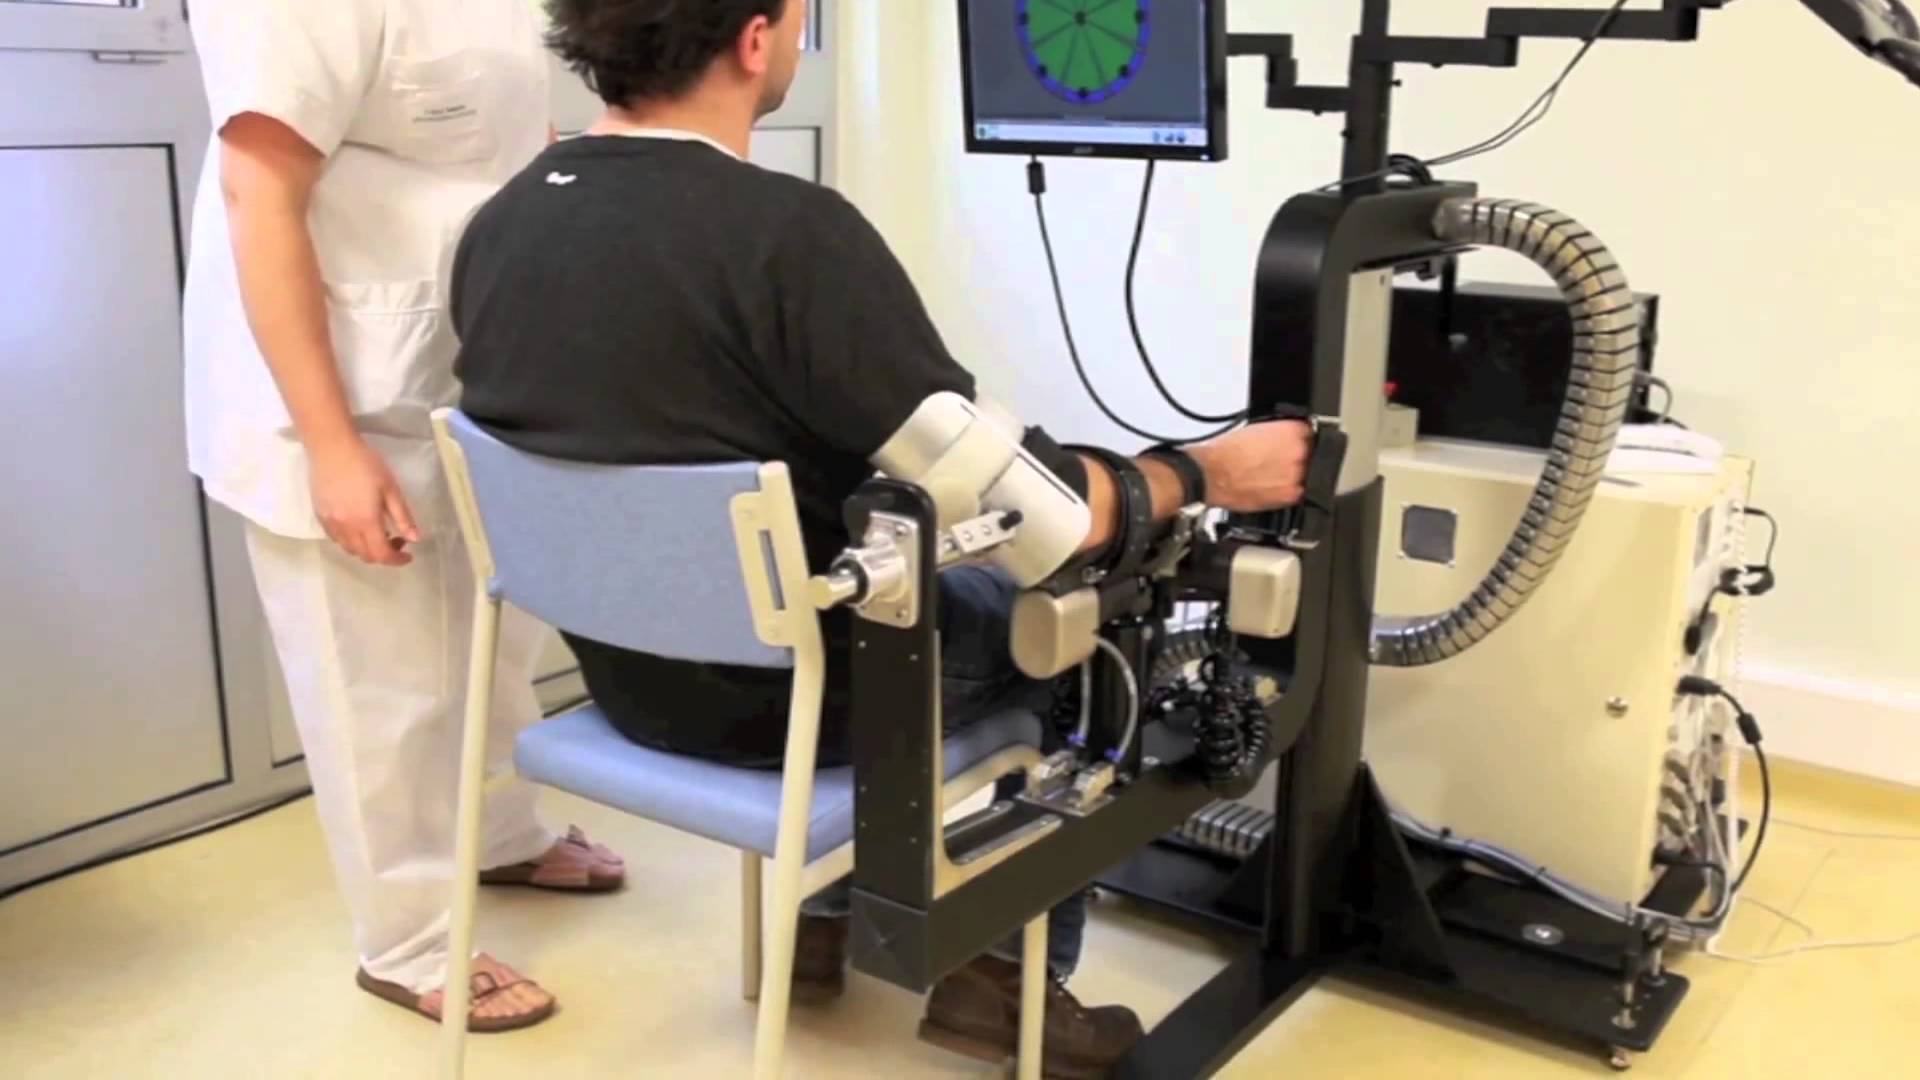 The role of robotics in physical rehabilitation